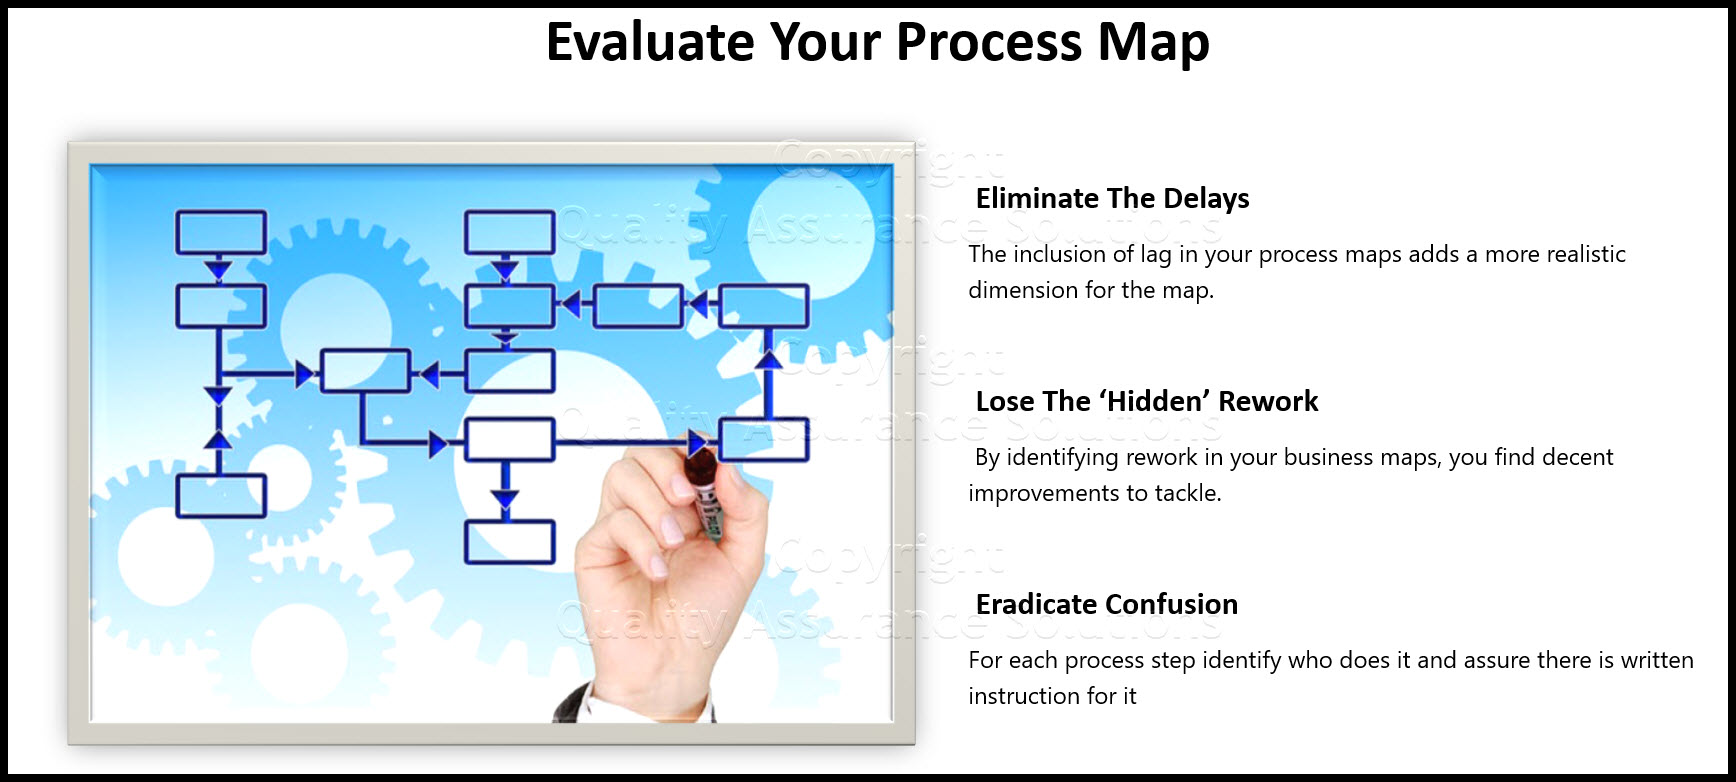 Get Real About Your Business Process Map. If You Really Want To Improve Here are 3 Tips